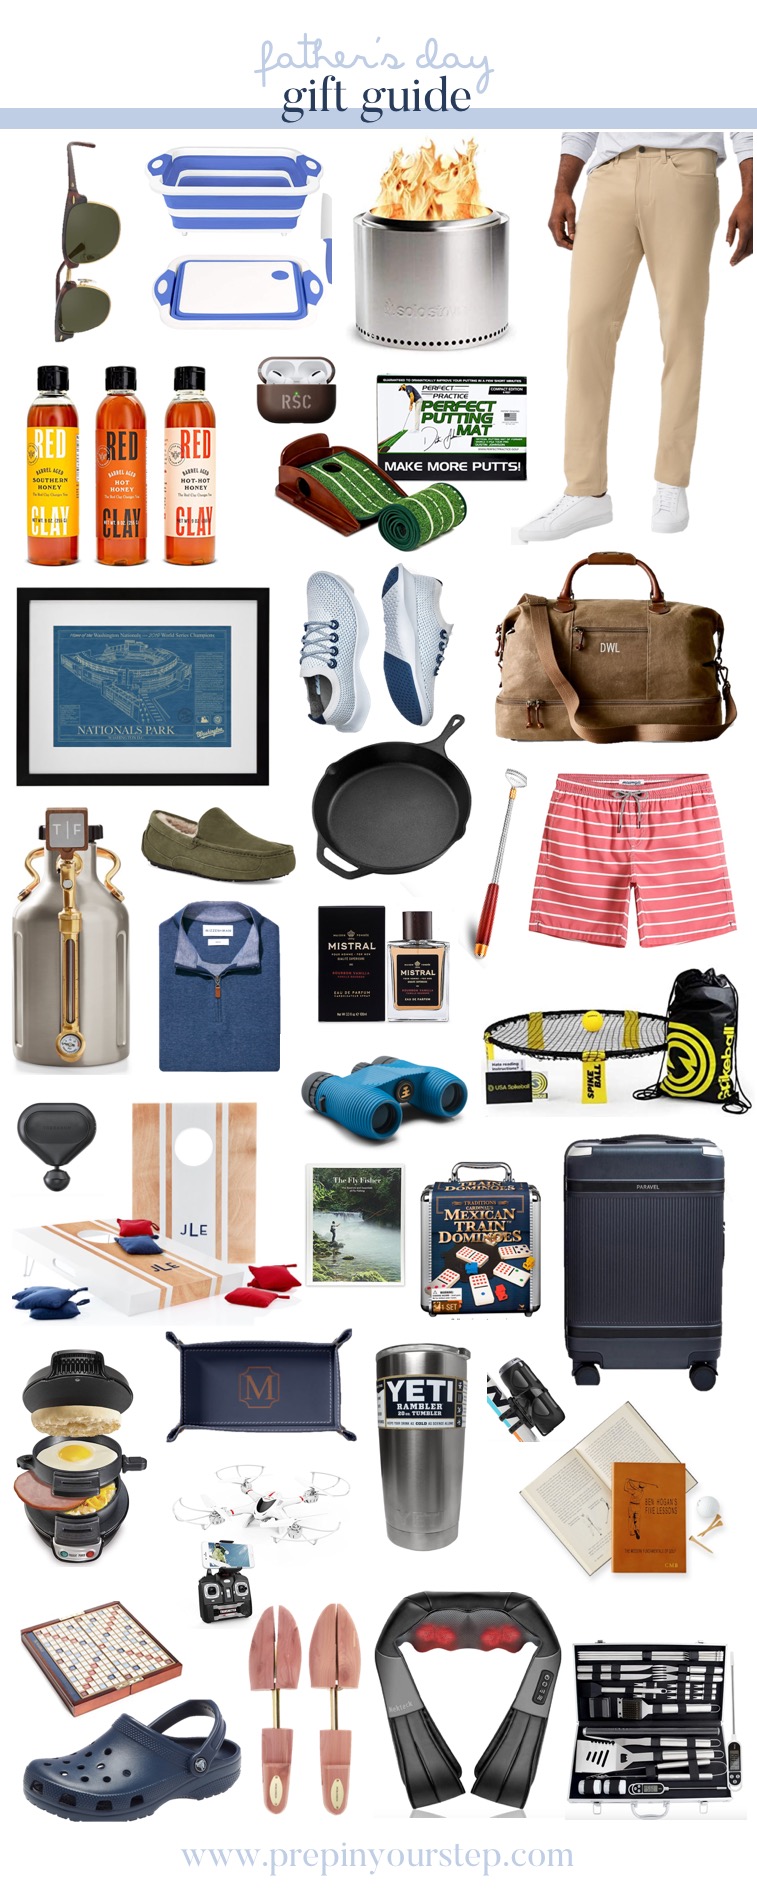 Father's Day 2021: A comprehensive list of Father's Day gifting ideas